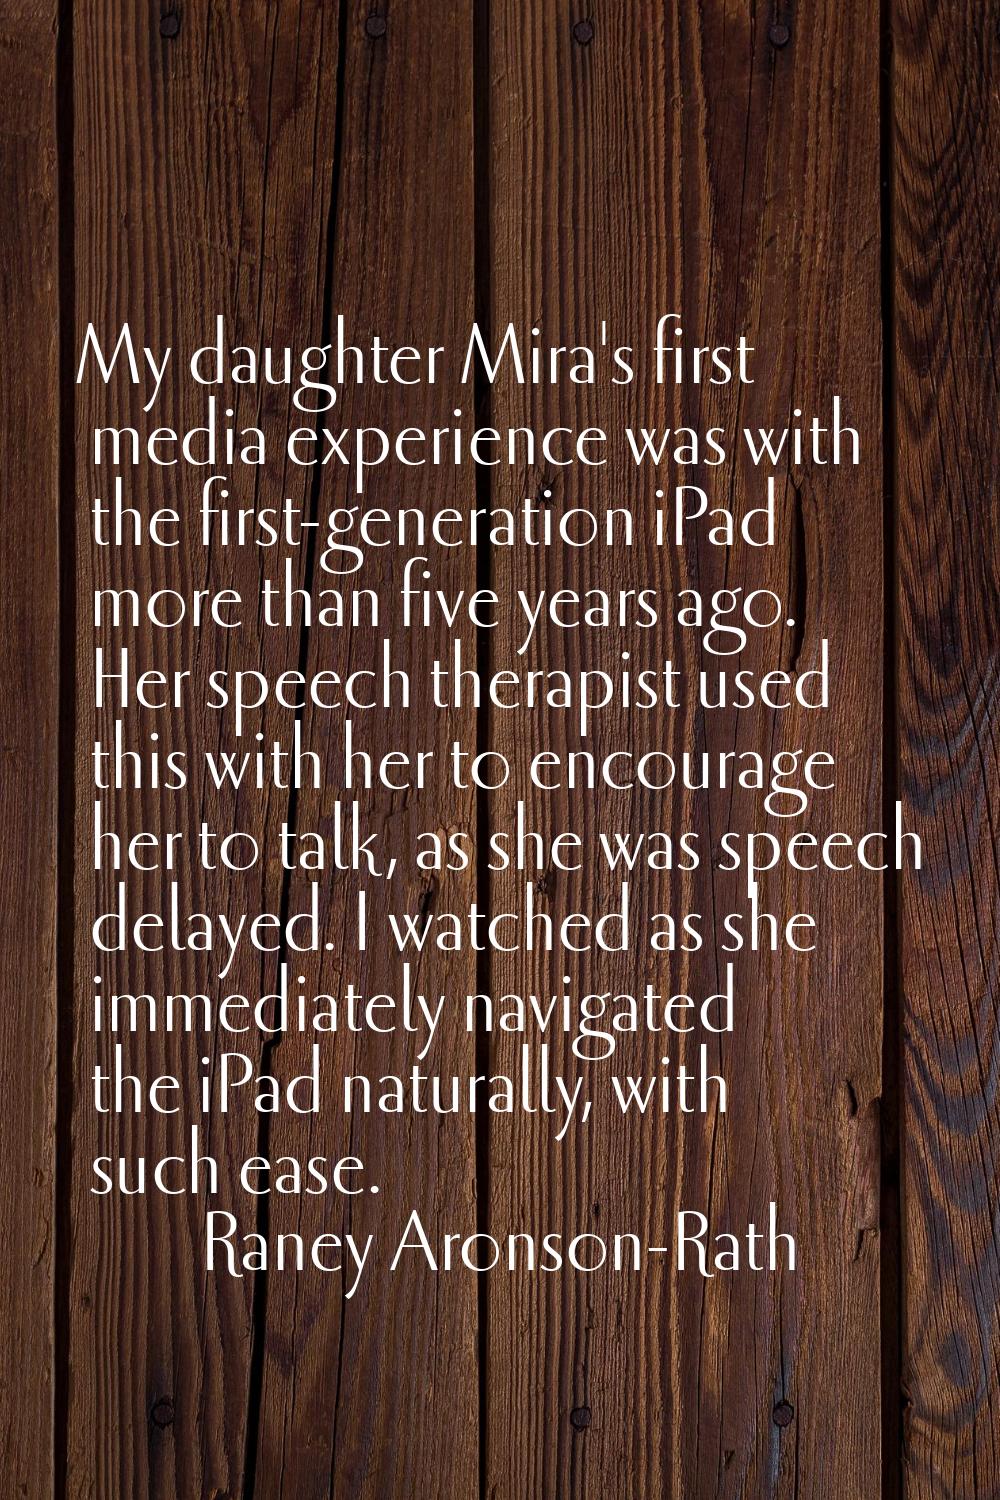 My daughter Mira's first media experience was with the first-generation iPad more than five years a